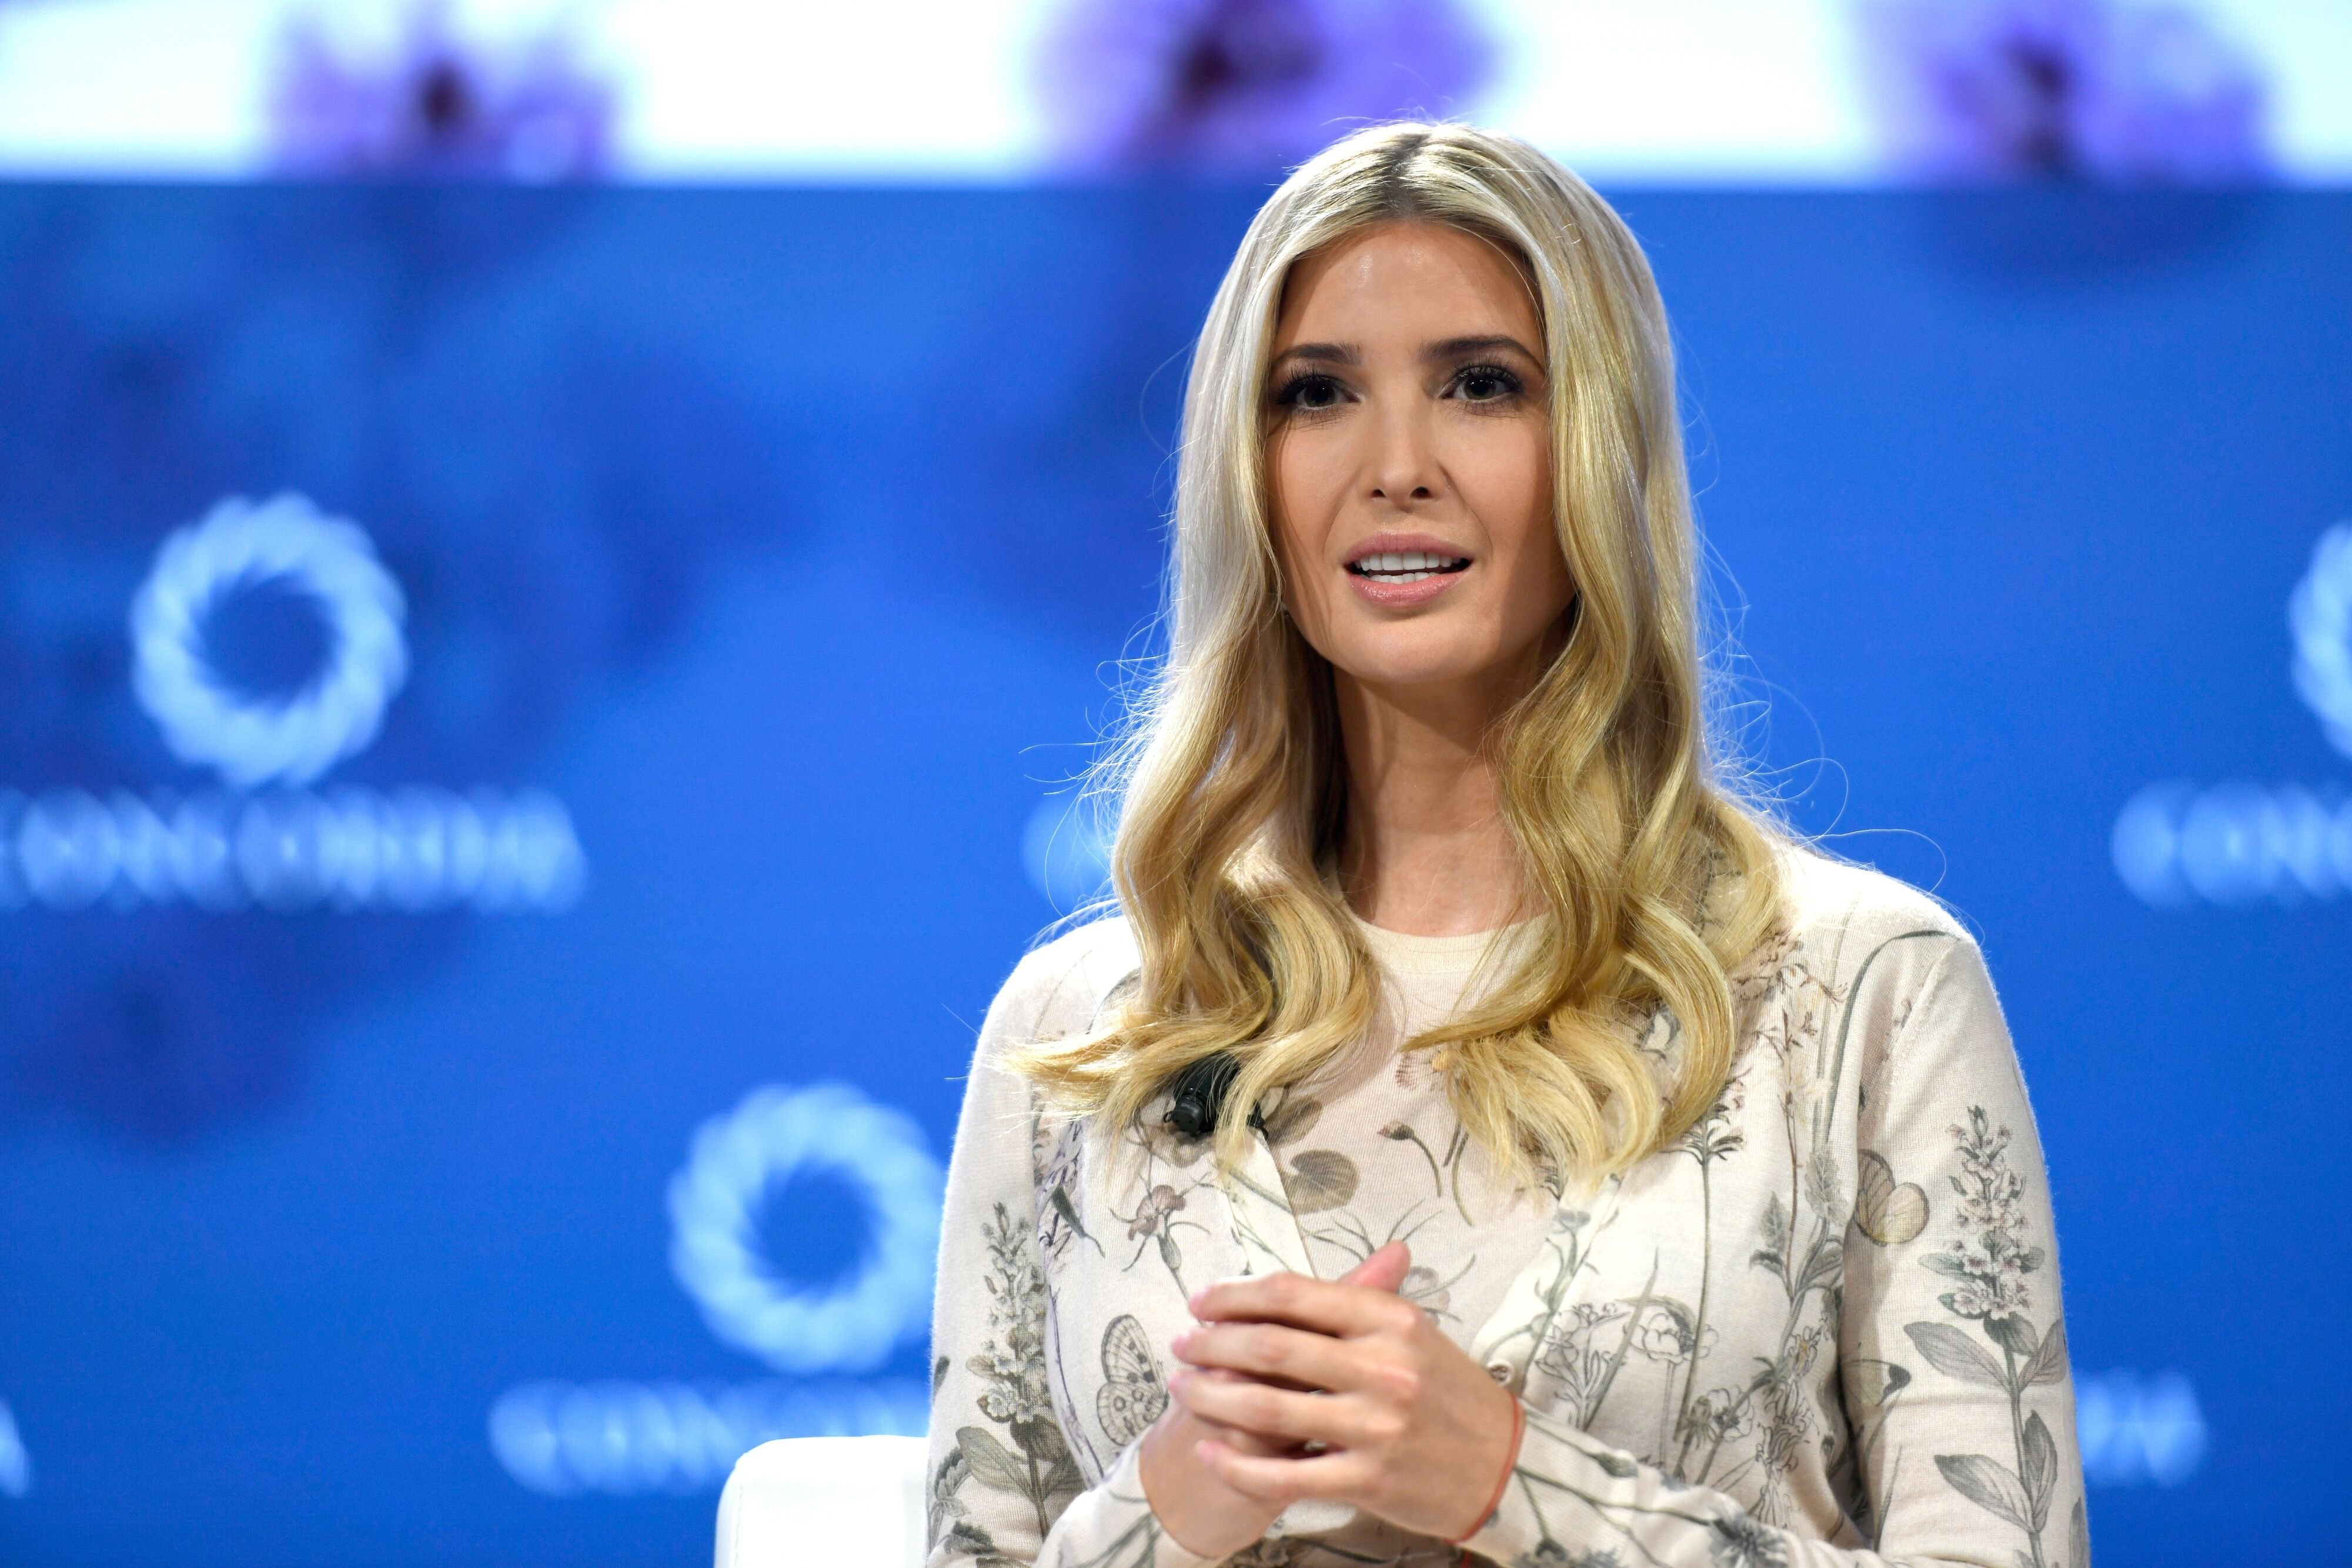 White House advisor Ivanka Trump speaks during a roundtable discussion focusing on assisting American workers for the changing economy at El Centro community college on October 3, 2019 in Dallas, Texas | Photo: Getty Images